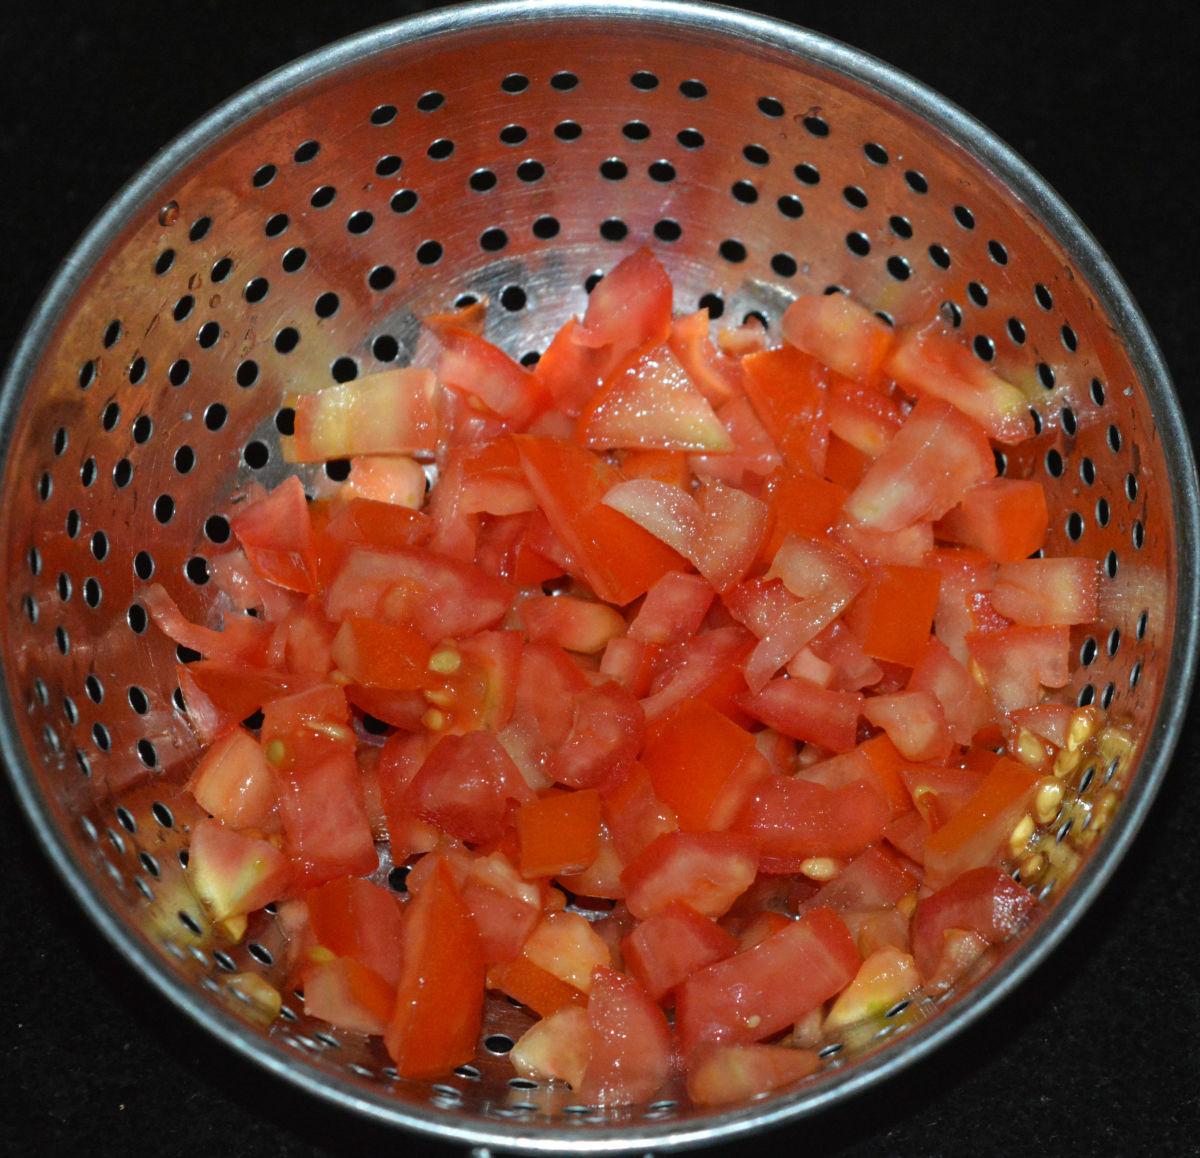 Step one: Finely chop the tomatoes. Place them in a colander. Apply salt. After 5 minutes, pour water over them in order to wash away the seeds. Set aside.